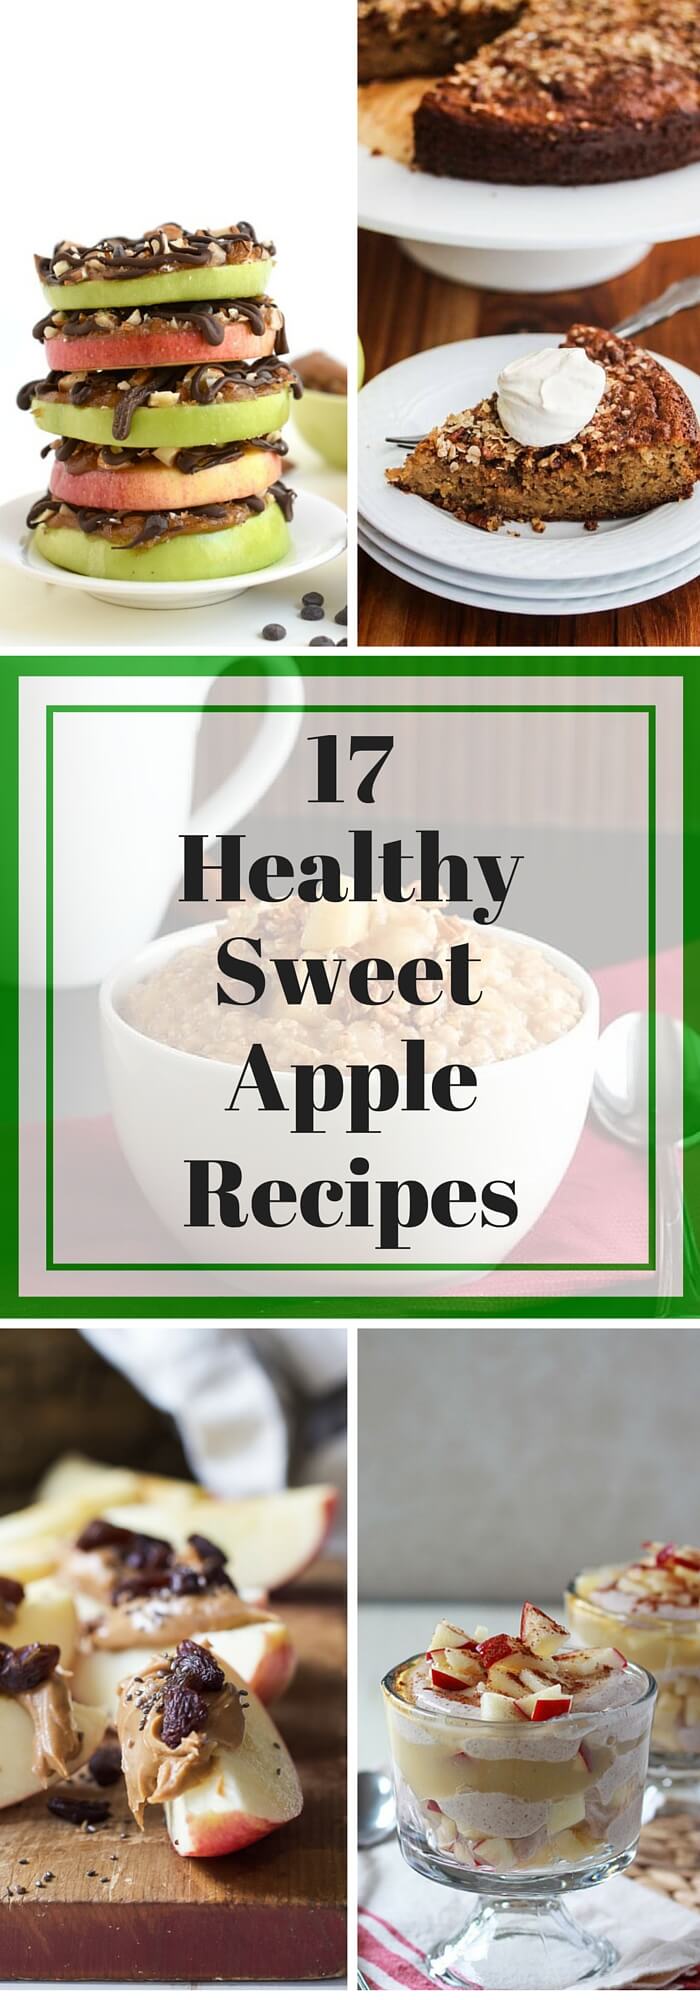 17 Healthy Sweet Apple Recipes - apples are in season so enjoy them in all these healthy apple breakfast, snack and dessert recipes!